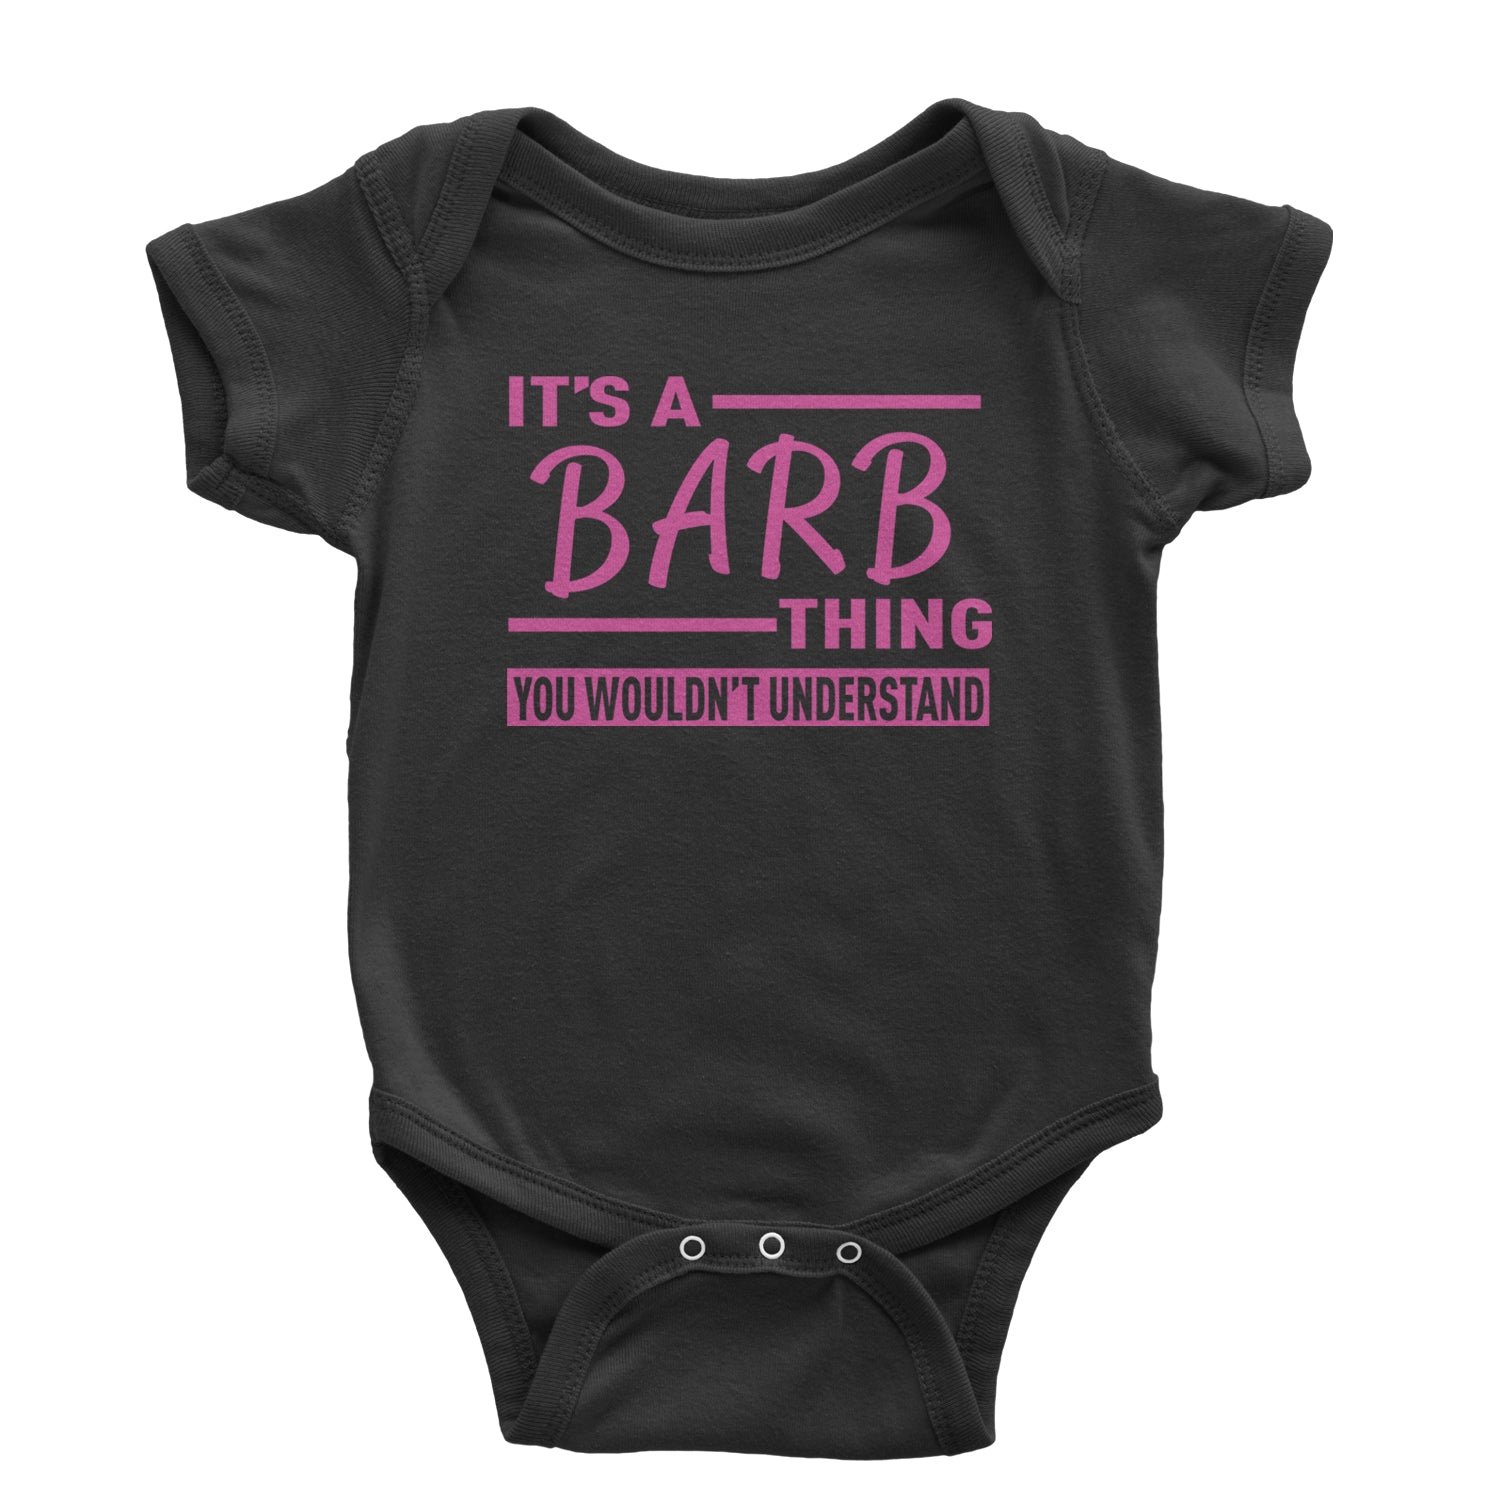 It's A Barb Thing, You Wouldn't Understand Infant One-Piece Romper Bodysuit and Toddler T-shirt